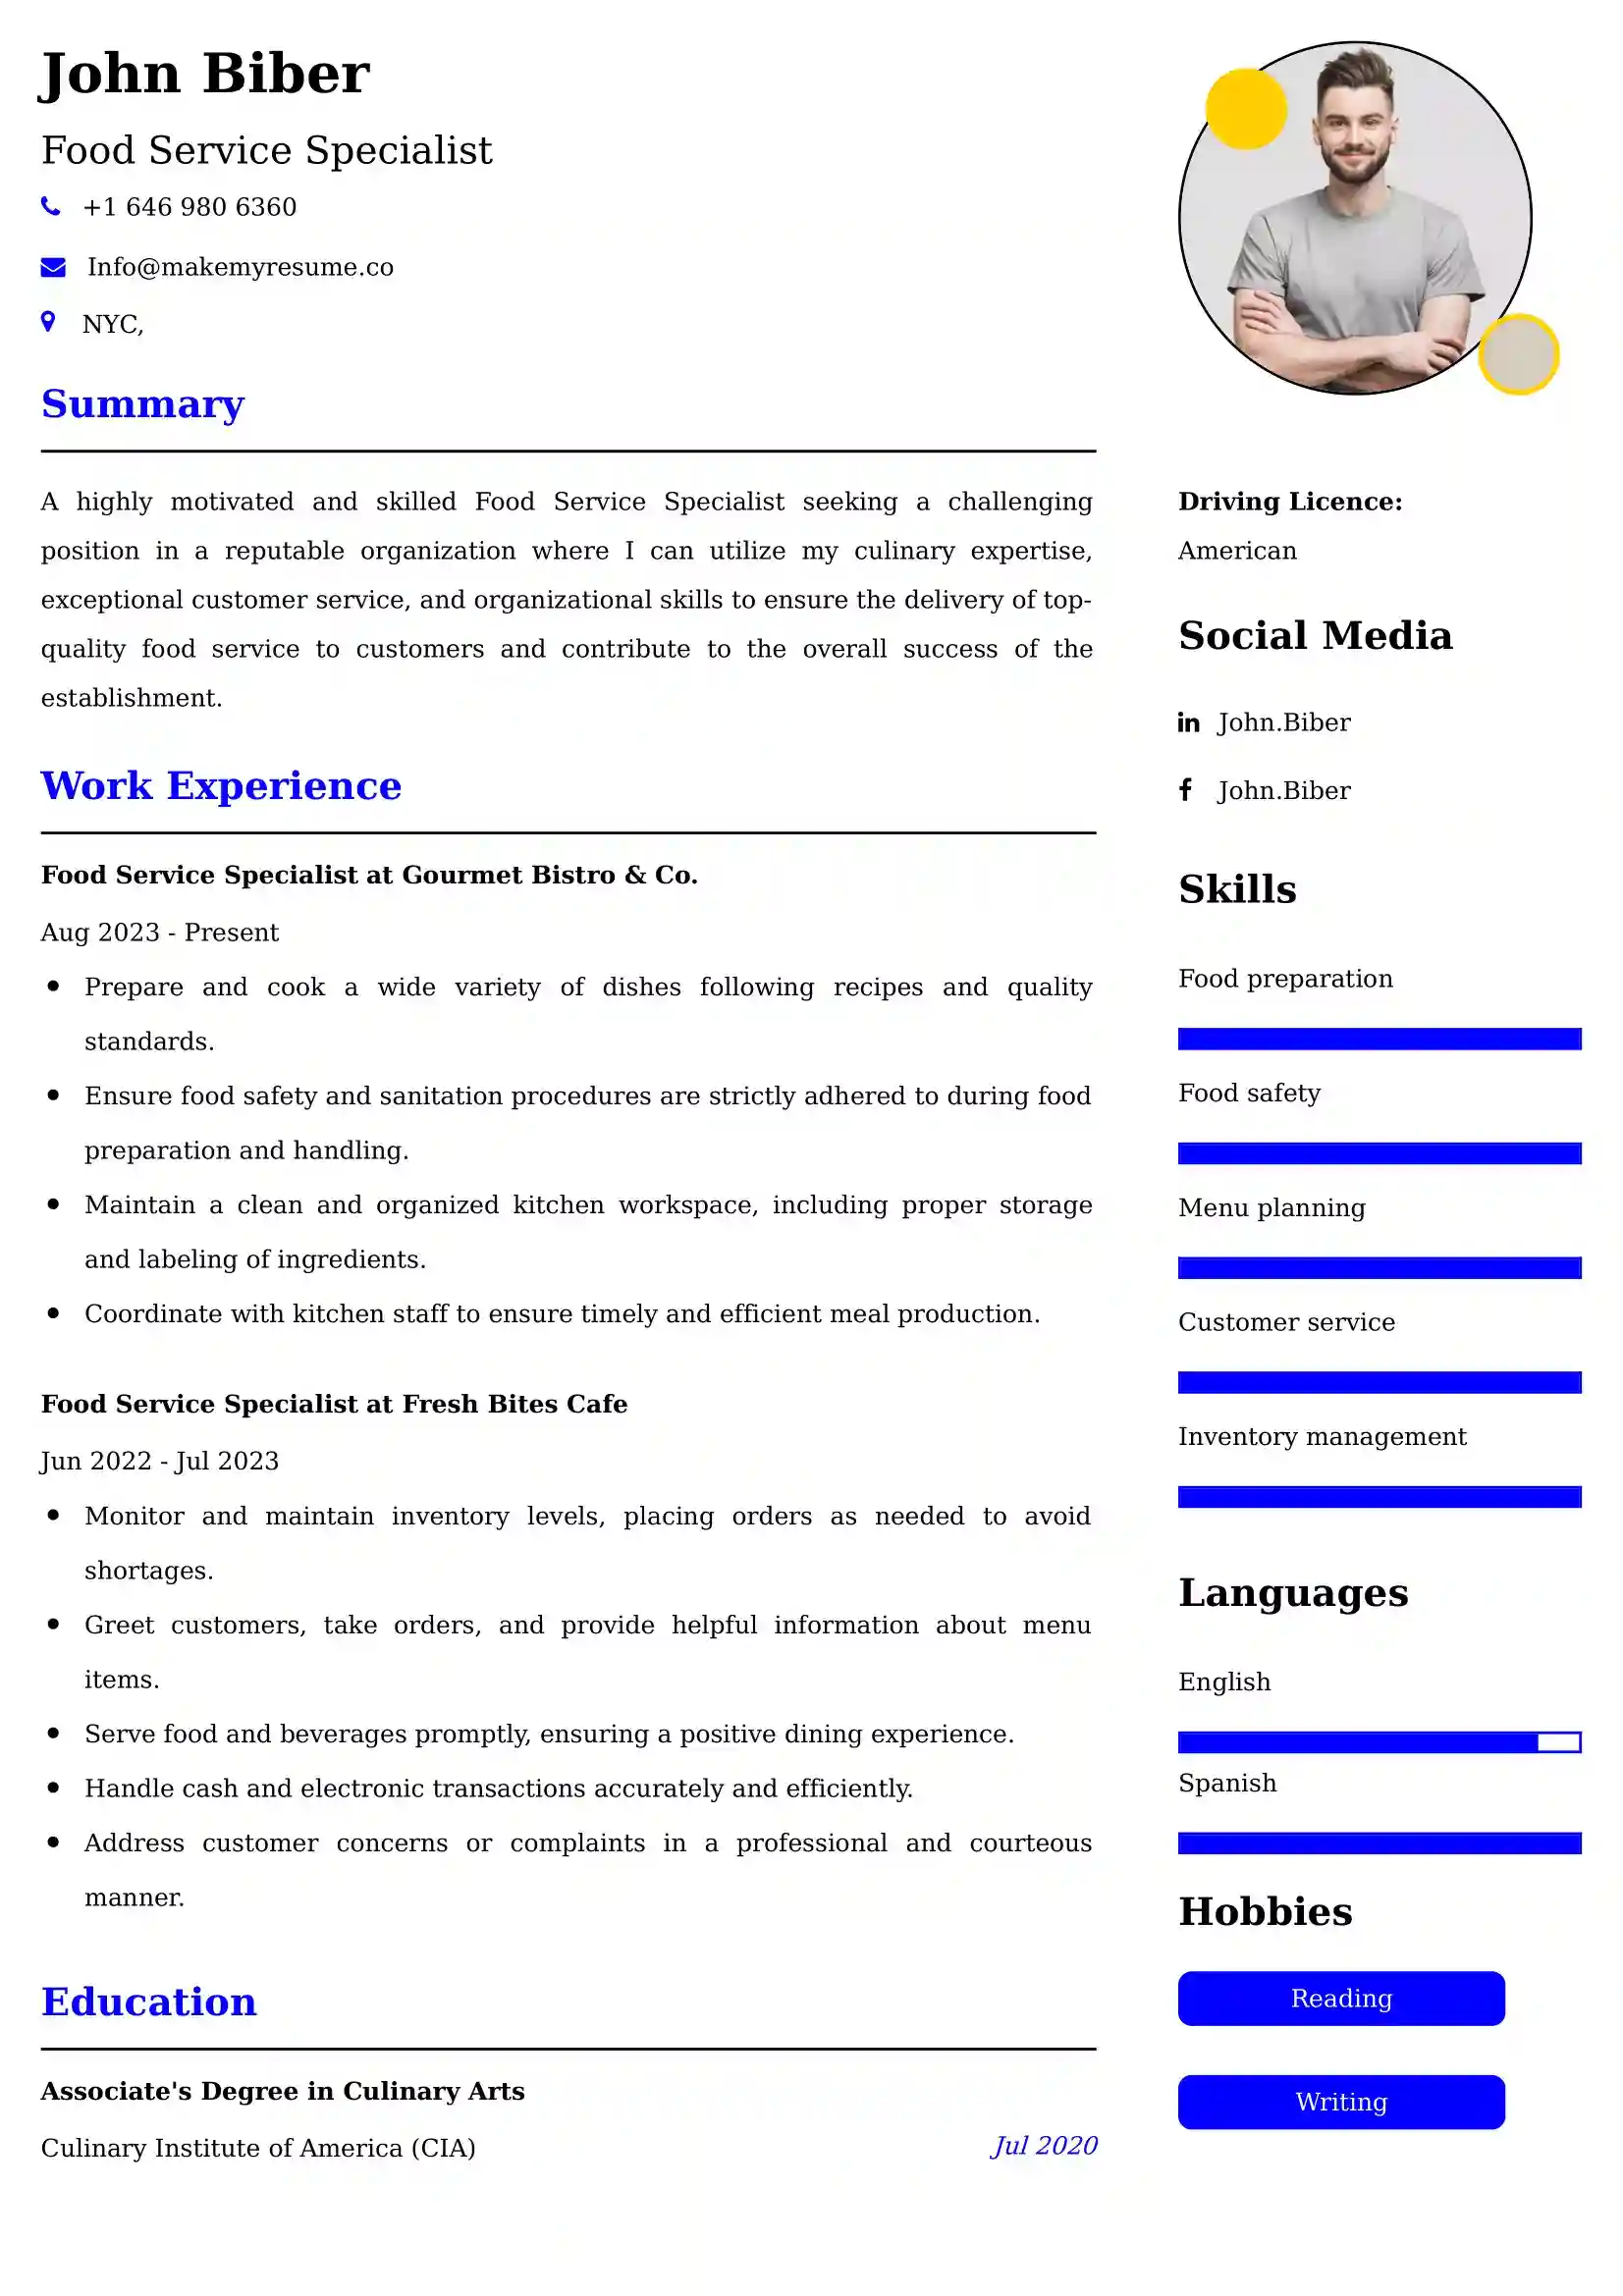 Food Service Specialist Resume Examples - Brazilian Format, Latest Template